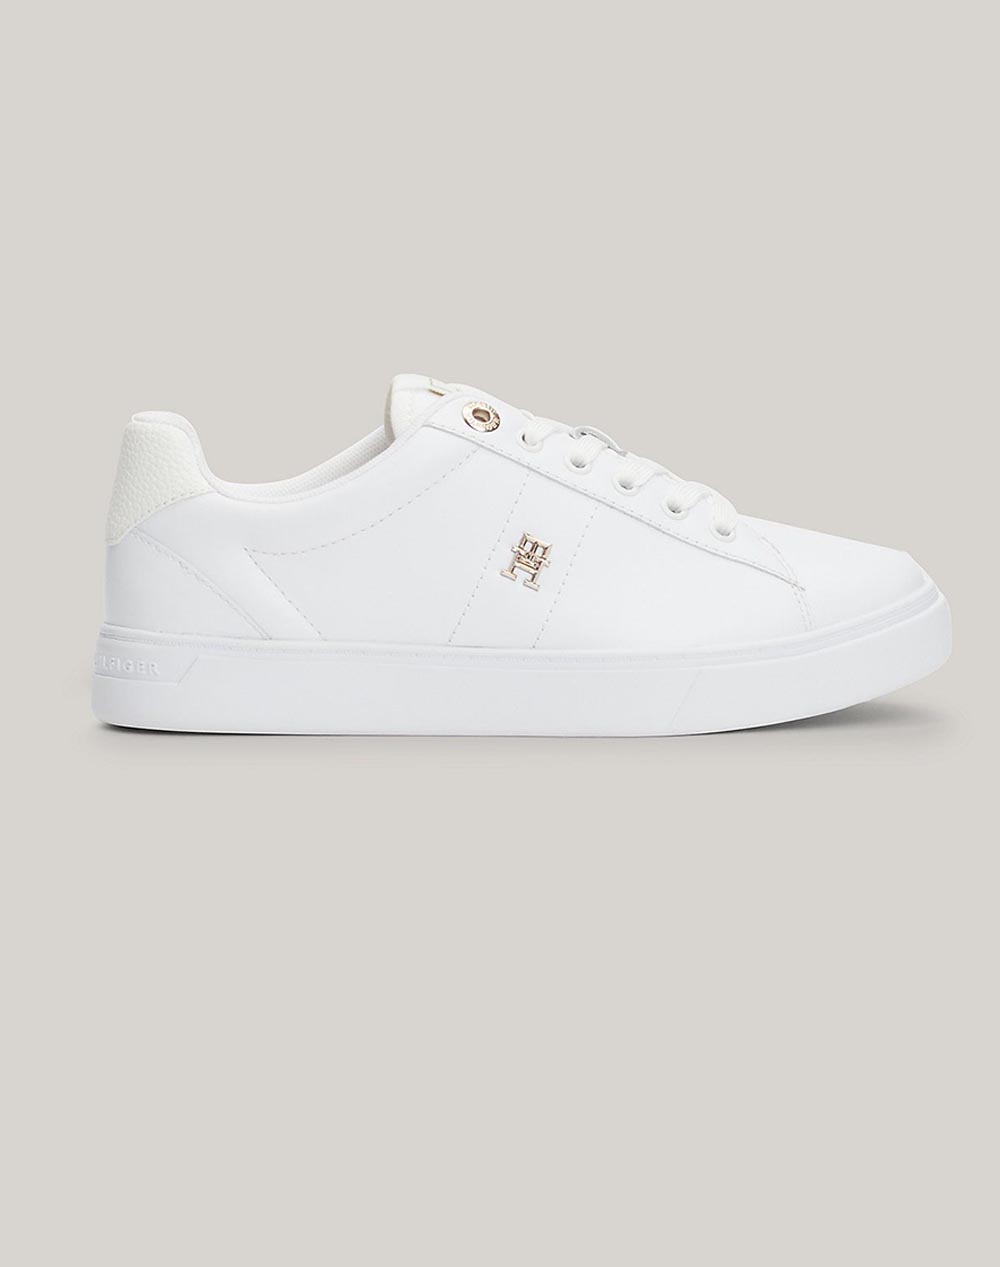 TOMMY HILFIGER ESSENTIAL ELEVATED COURT SNEAKER FW0FW07685-YBS White 3810ATOMM6070216_10778